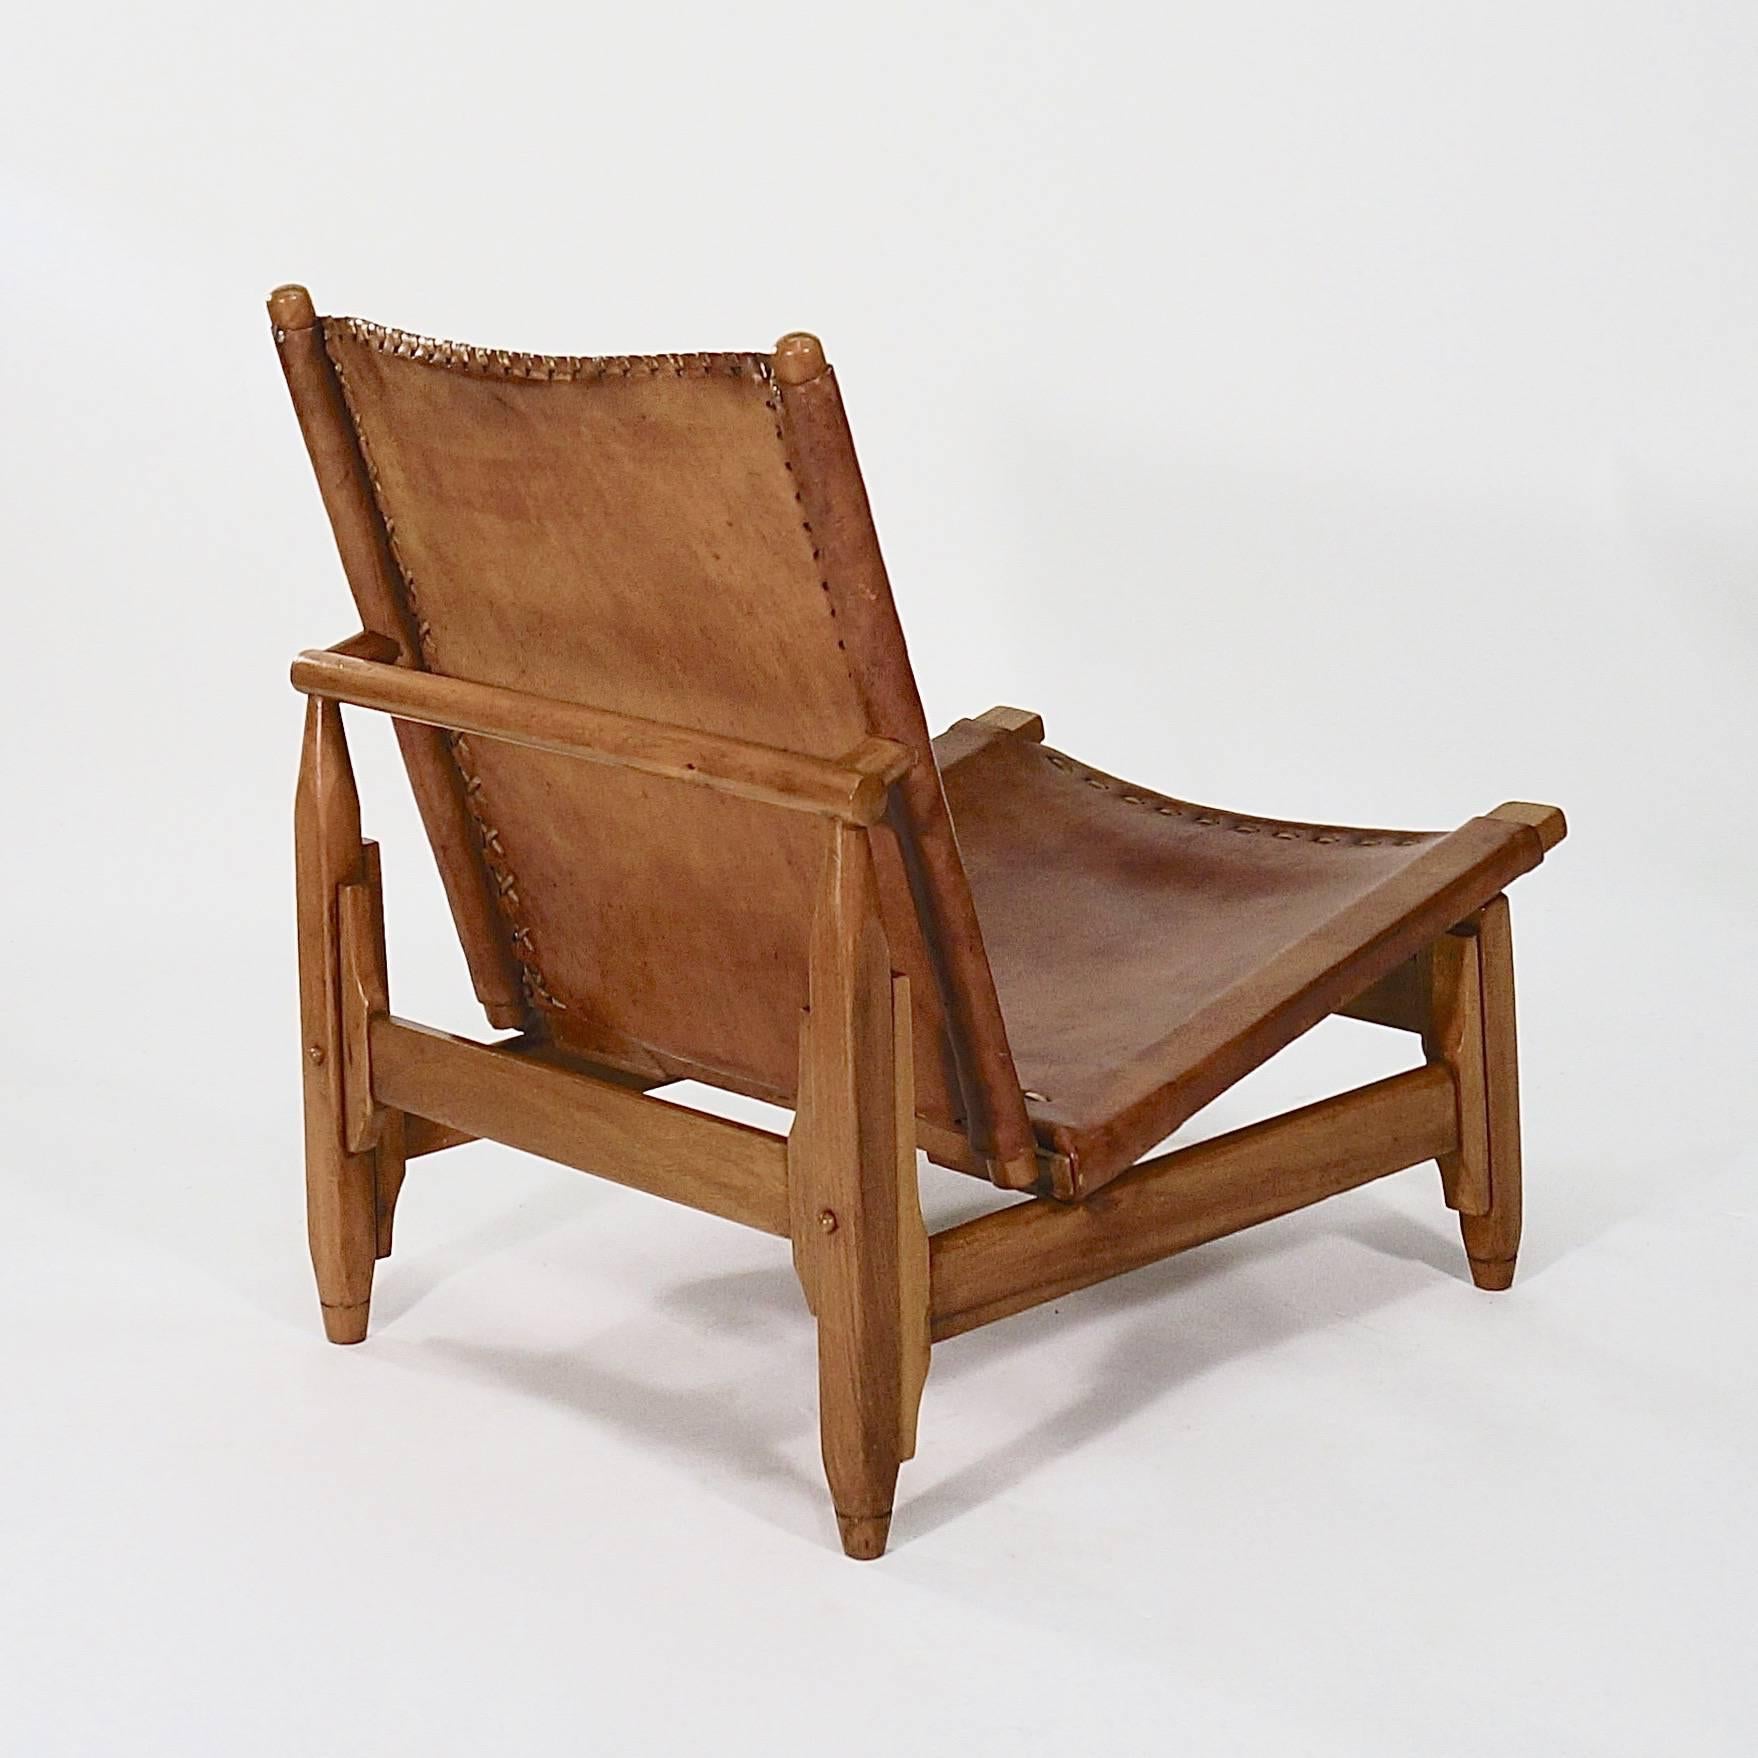 Polished Pair of Saddle-Stitched Leather and Walnut Low Chairs